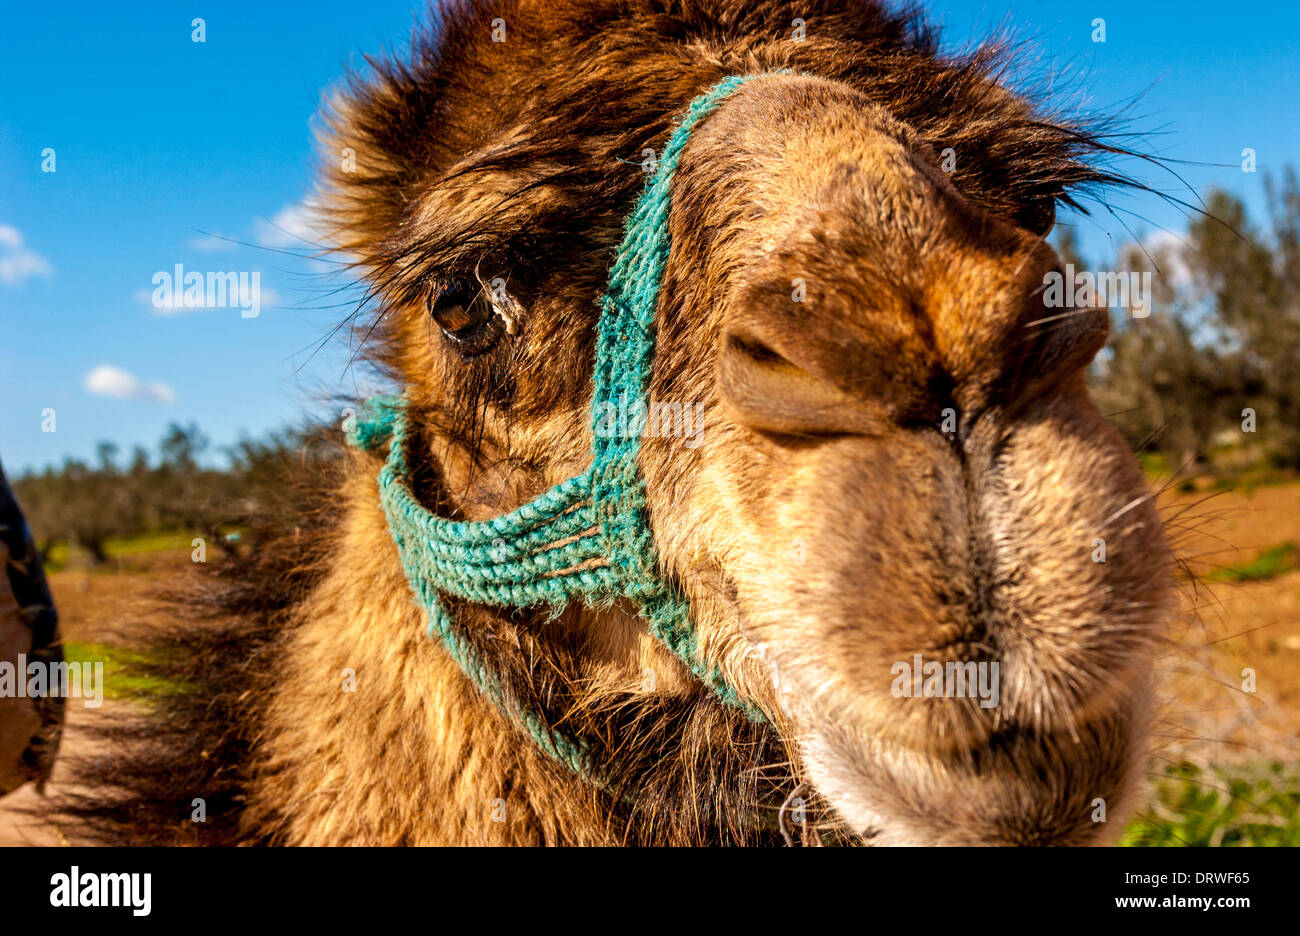 Close up of camel's head looking straight at camera Stock Photo